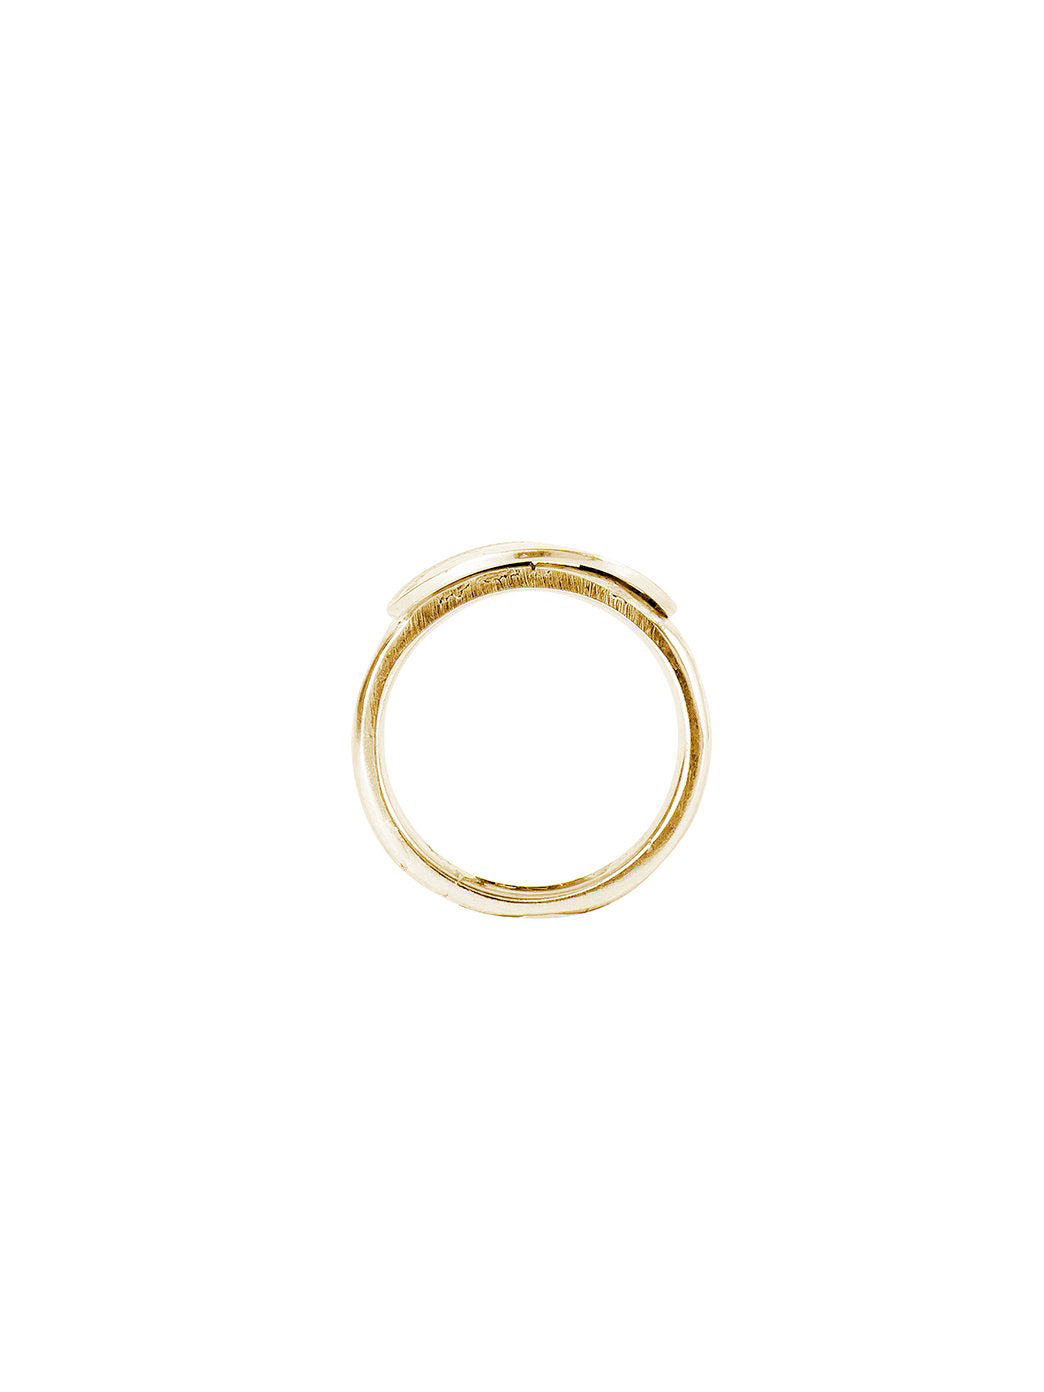 Fiorina Jewellery Gold 3p Bent Pinkie Ring Side View 1